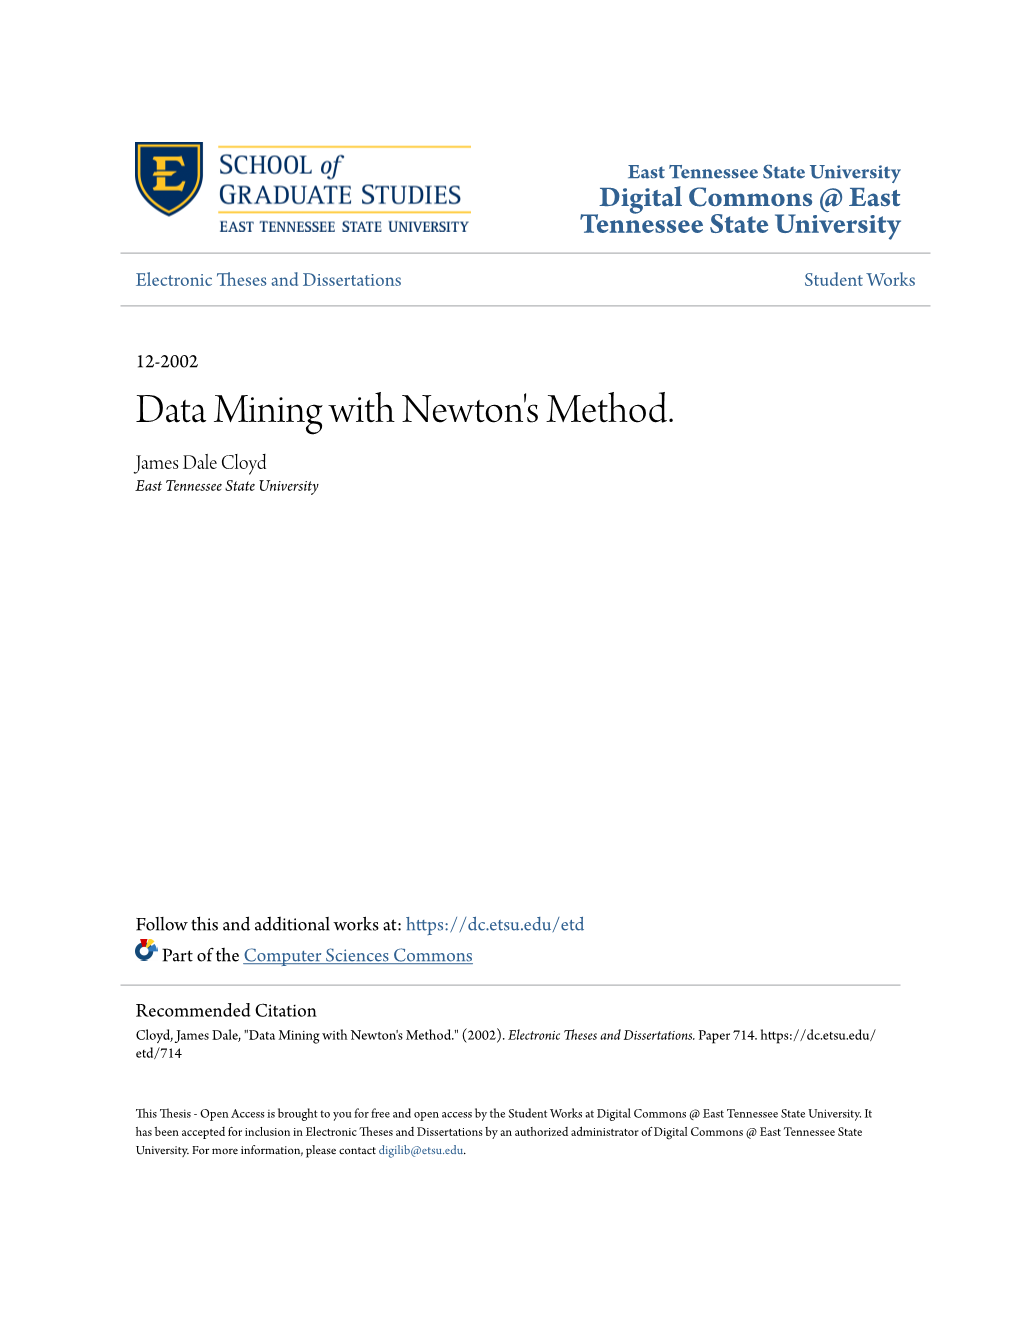 Data Mining with Newton's Method. James Dale Cloyd East Tennessee State University